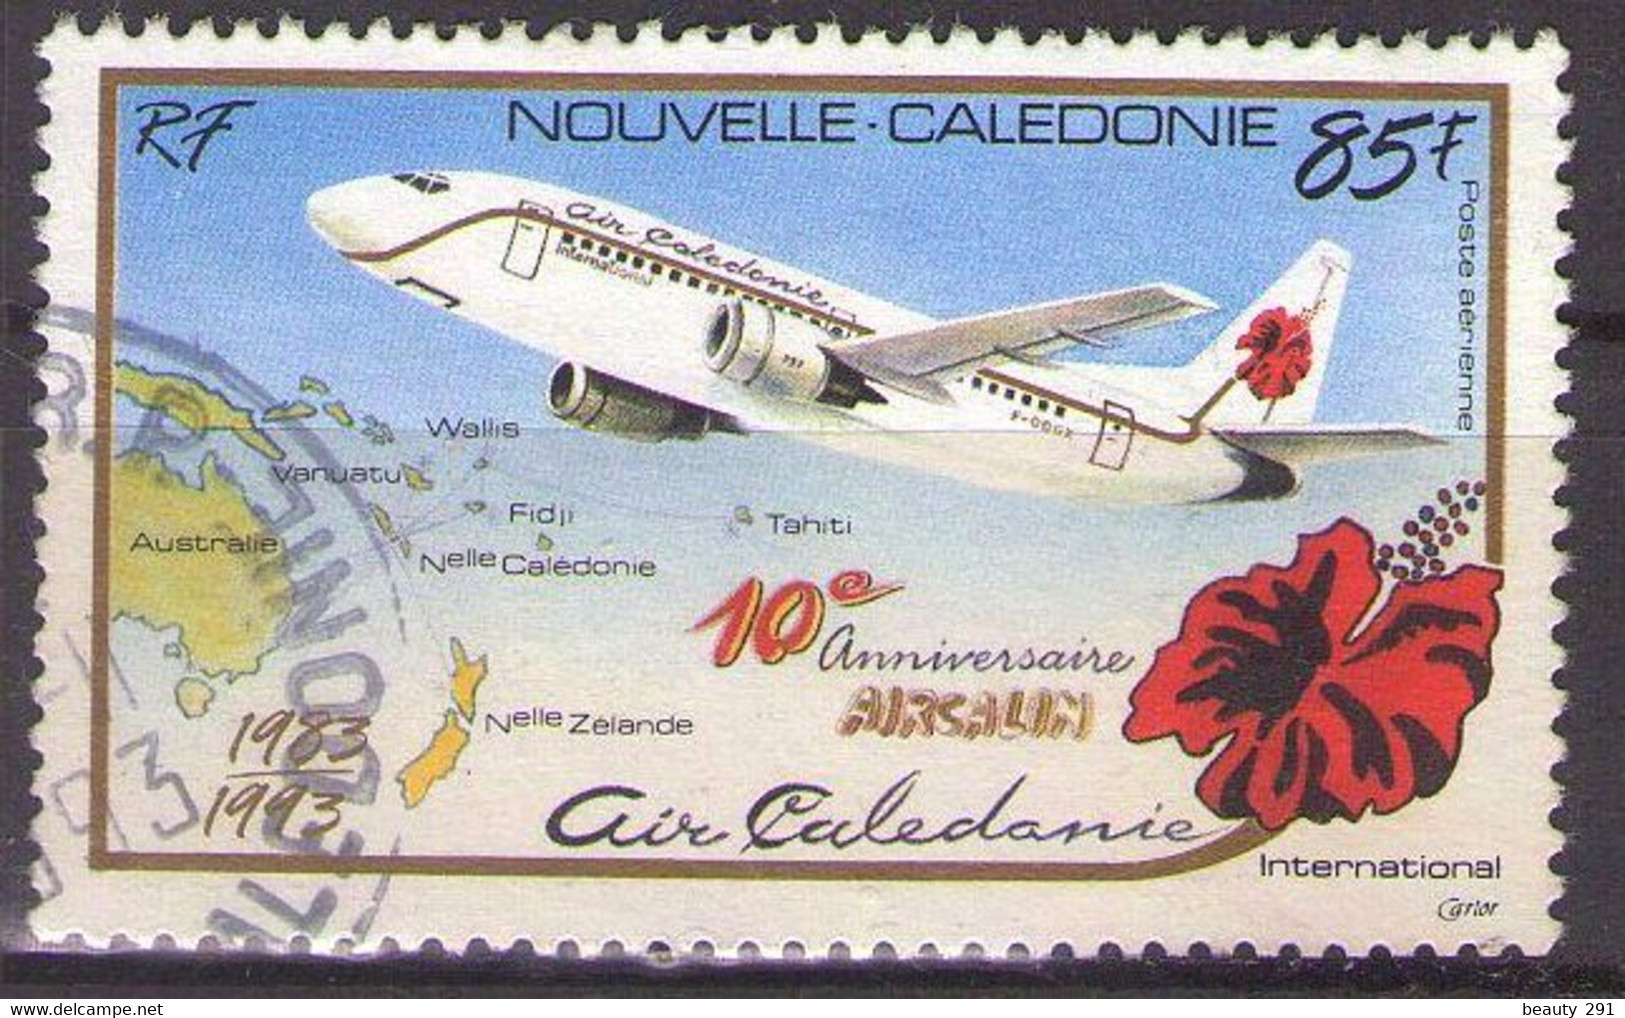 NOUVELLE CALEDONIE - POSTE AERIENNE  1993  Mi 968   USED - Used Stamps